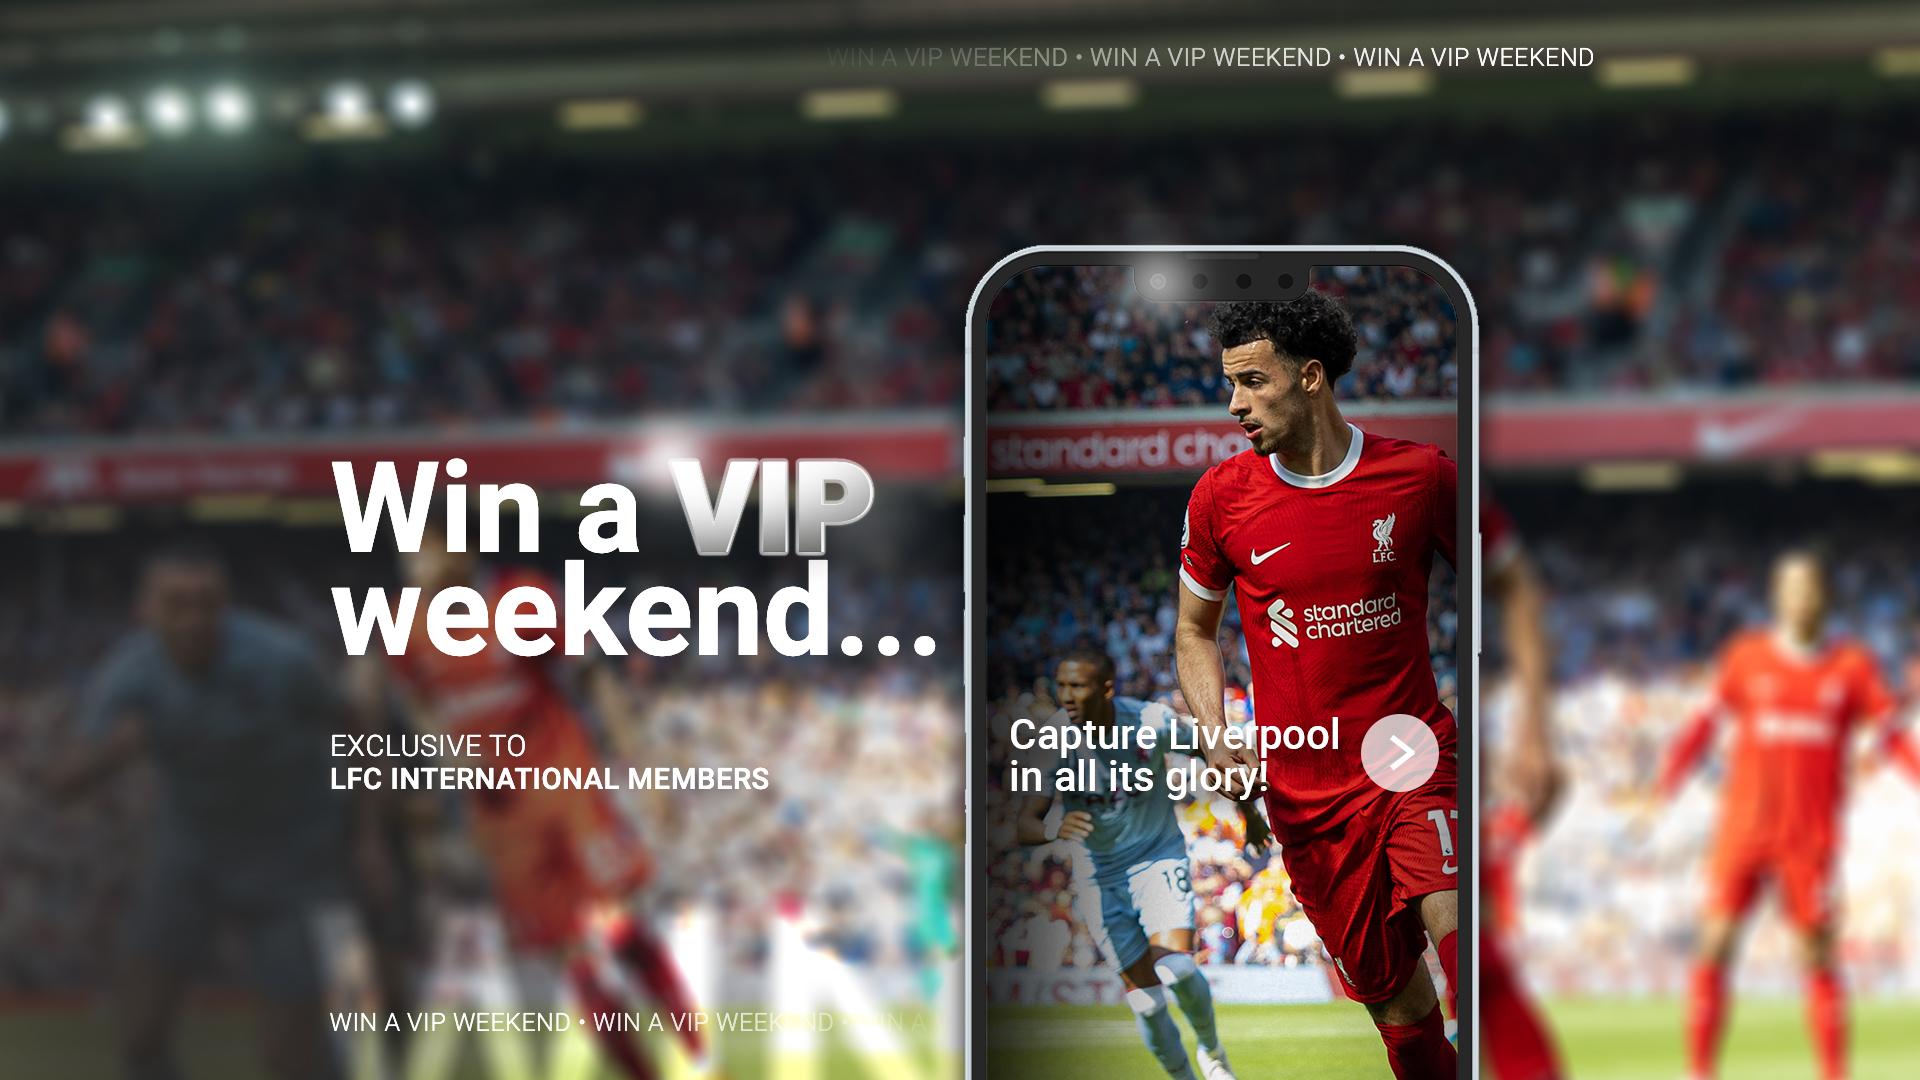 Competition Win VIP Merseyside derby experience